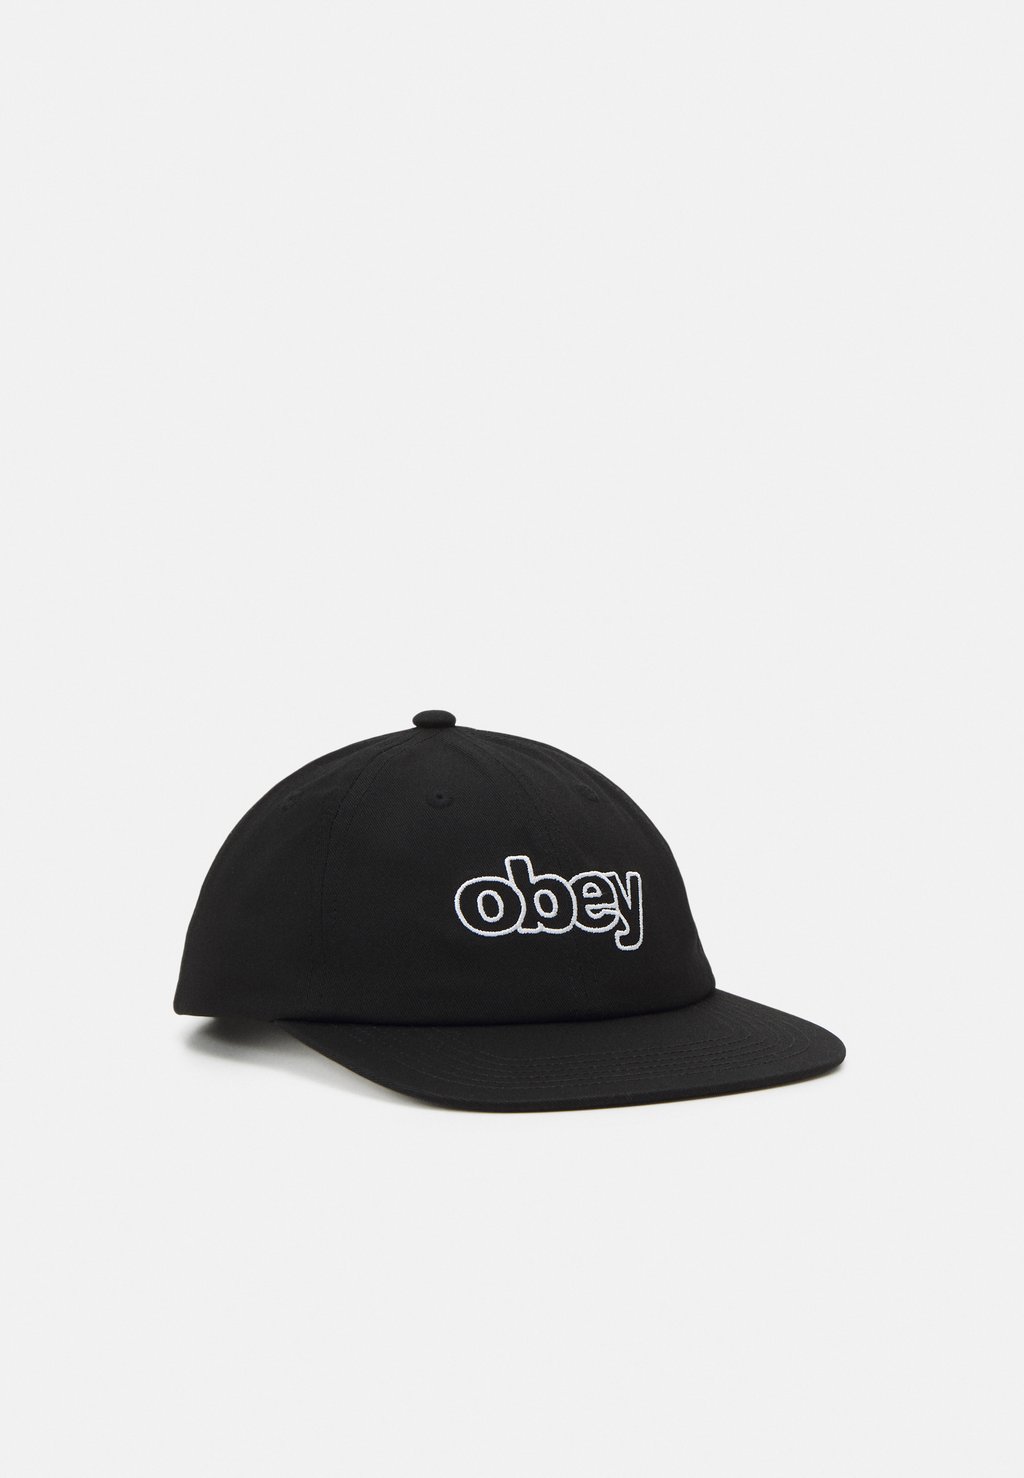 Кепка Obey Clothing OBEY SELECT 6 PANEL SNAPBACK, черный кепка obey clothing obey case 5 panel snapback кремовый